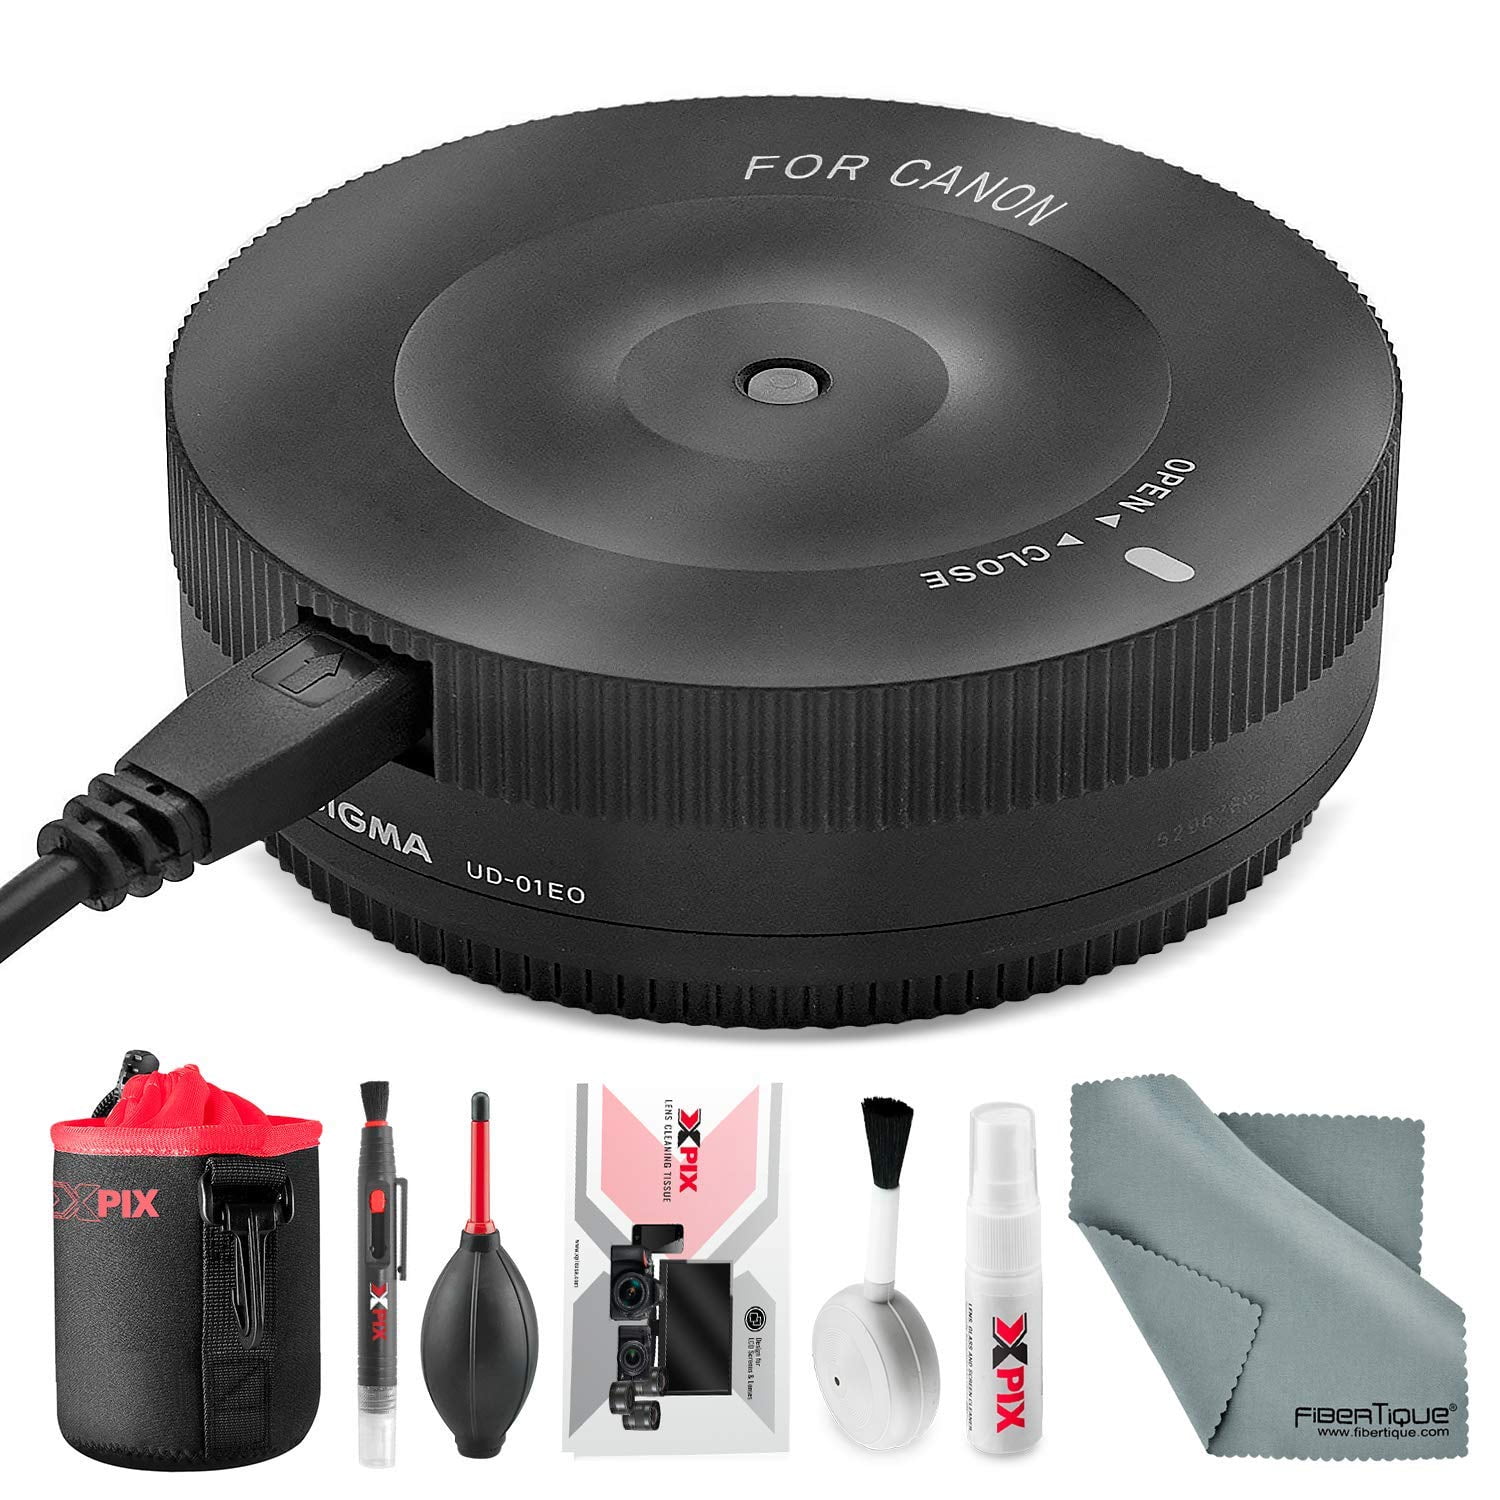 Dock for Canon EF-Mount Lenses with Xpix Deluxe Camera Lens Cleaning Kit and Bundle - Walmart.com